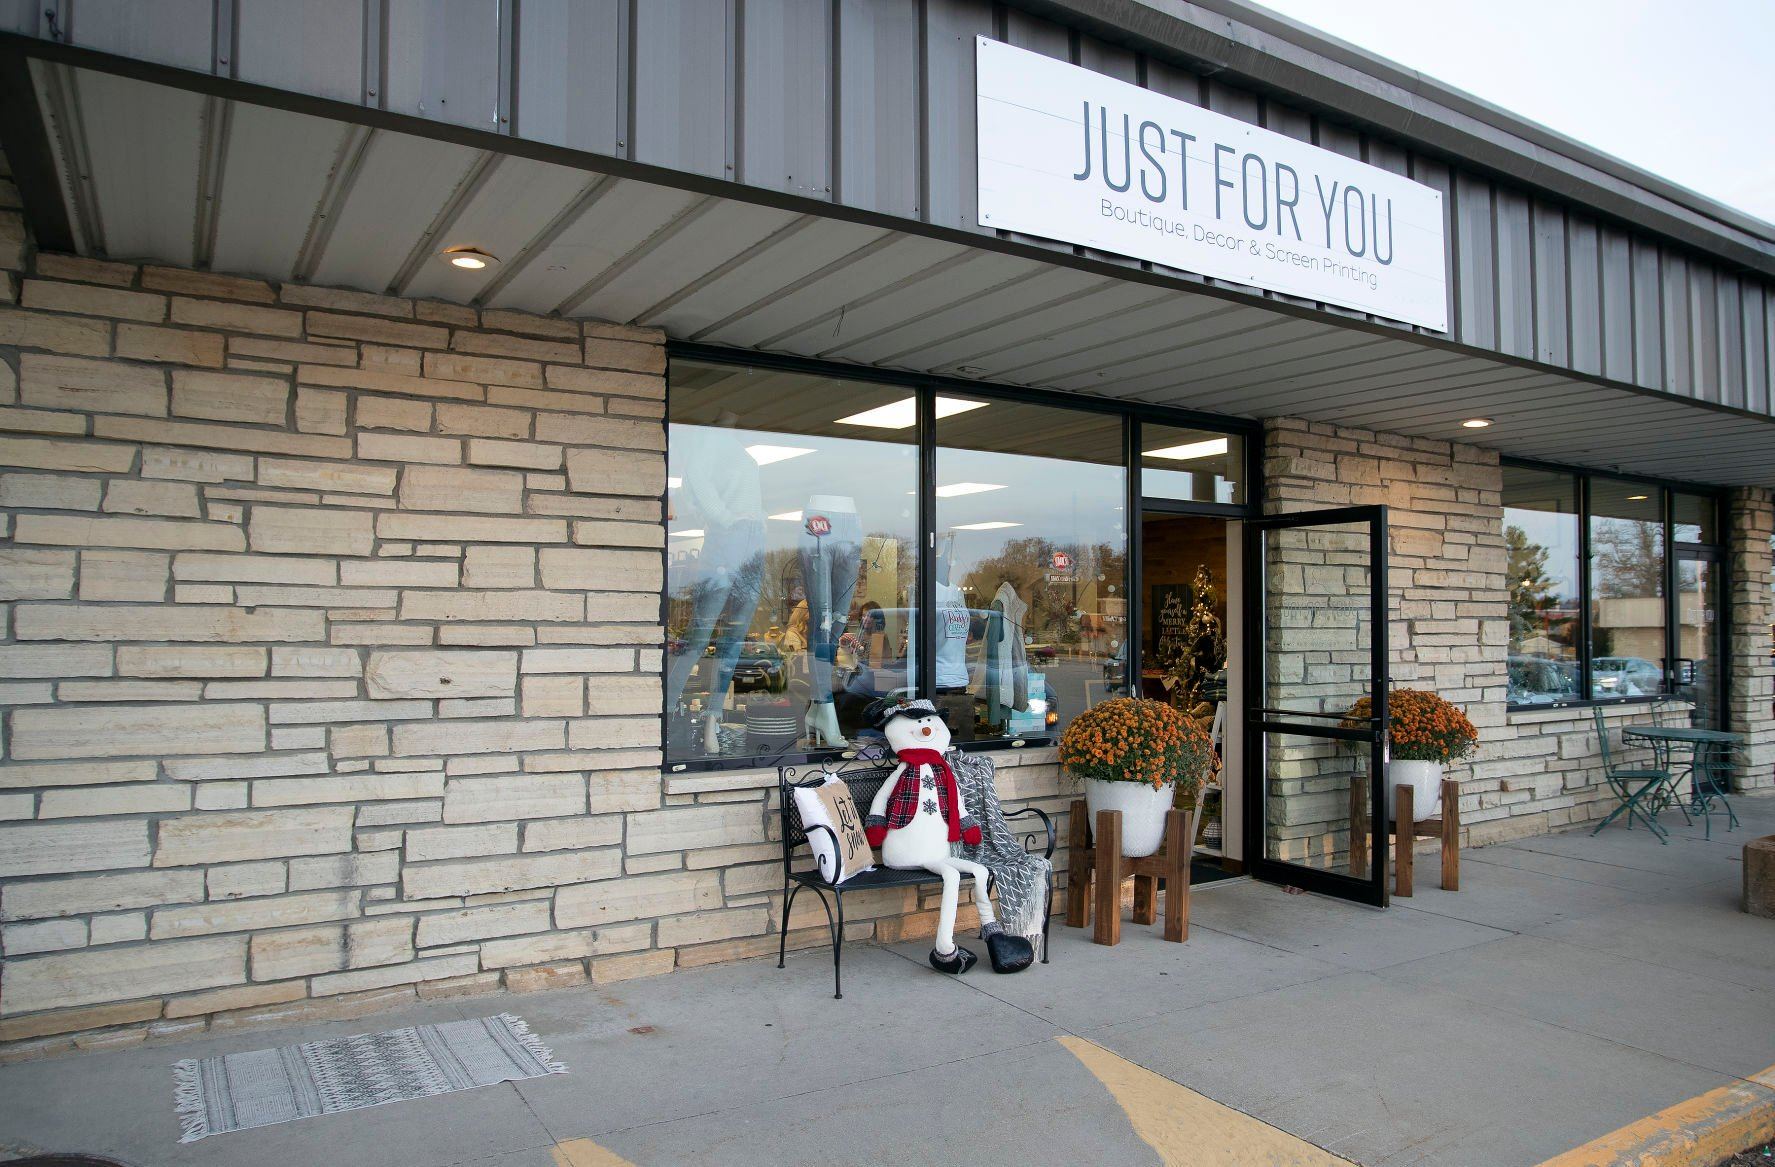 Exterior of Just For You Boutique in Dyersville, Iowa on Monday.    PHOTO CREDIT: Stephen Gassman